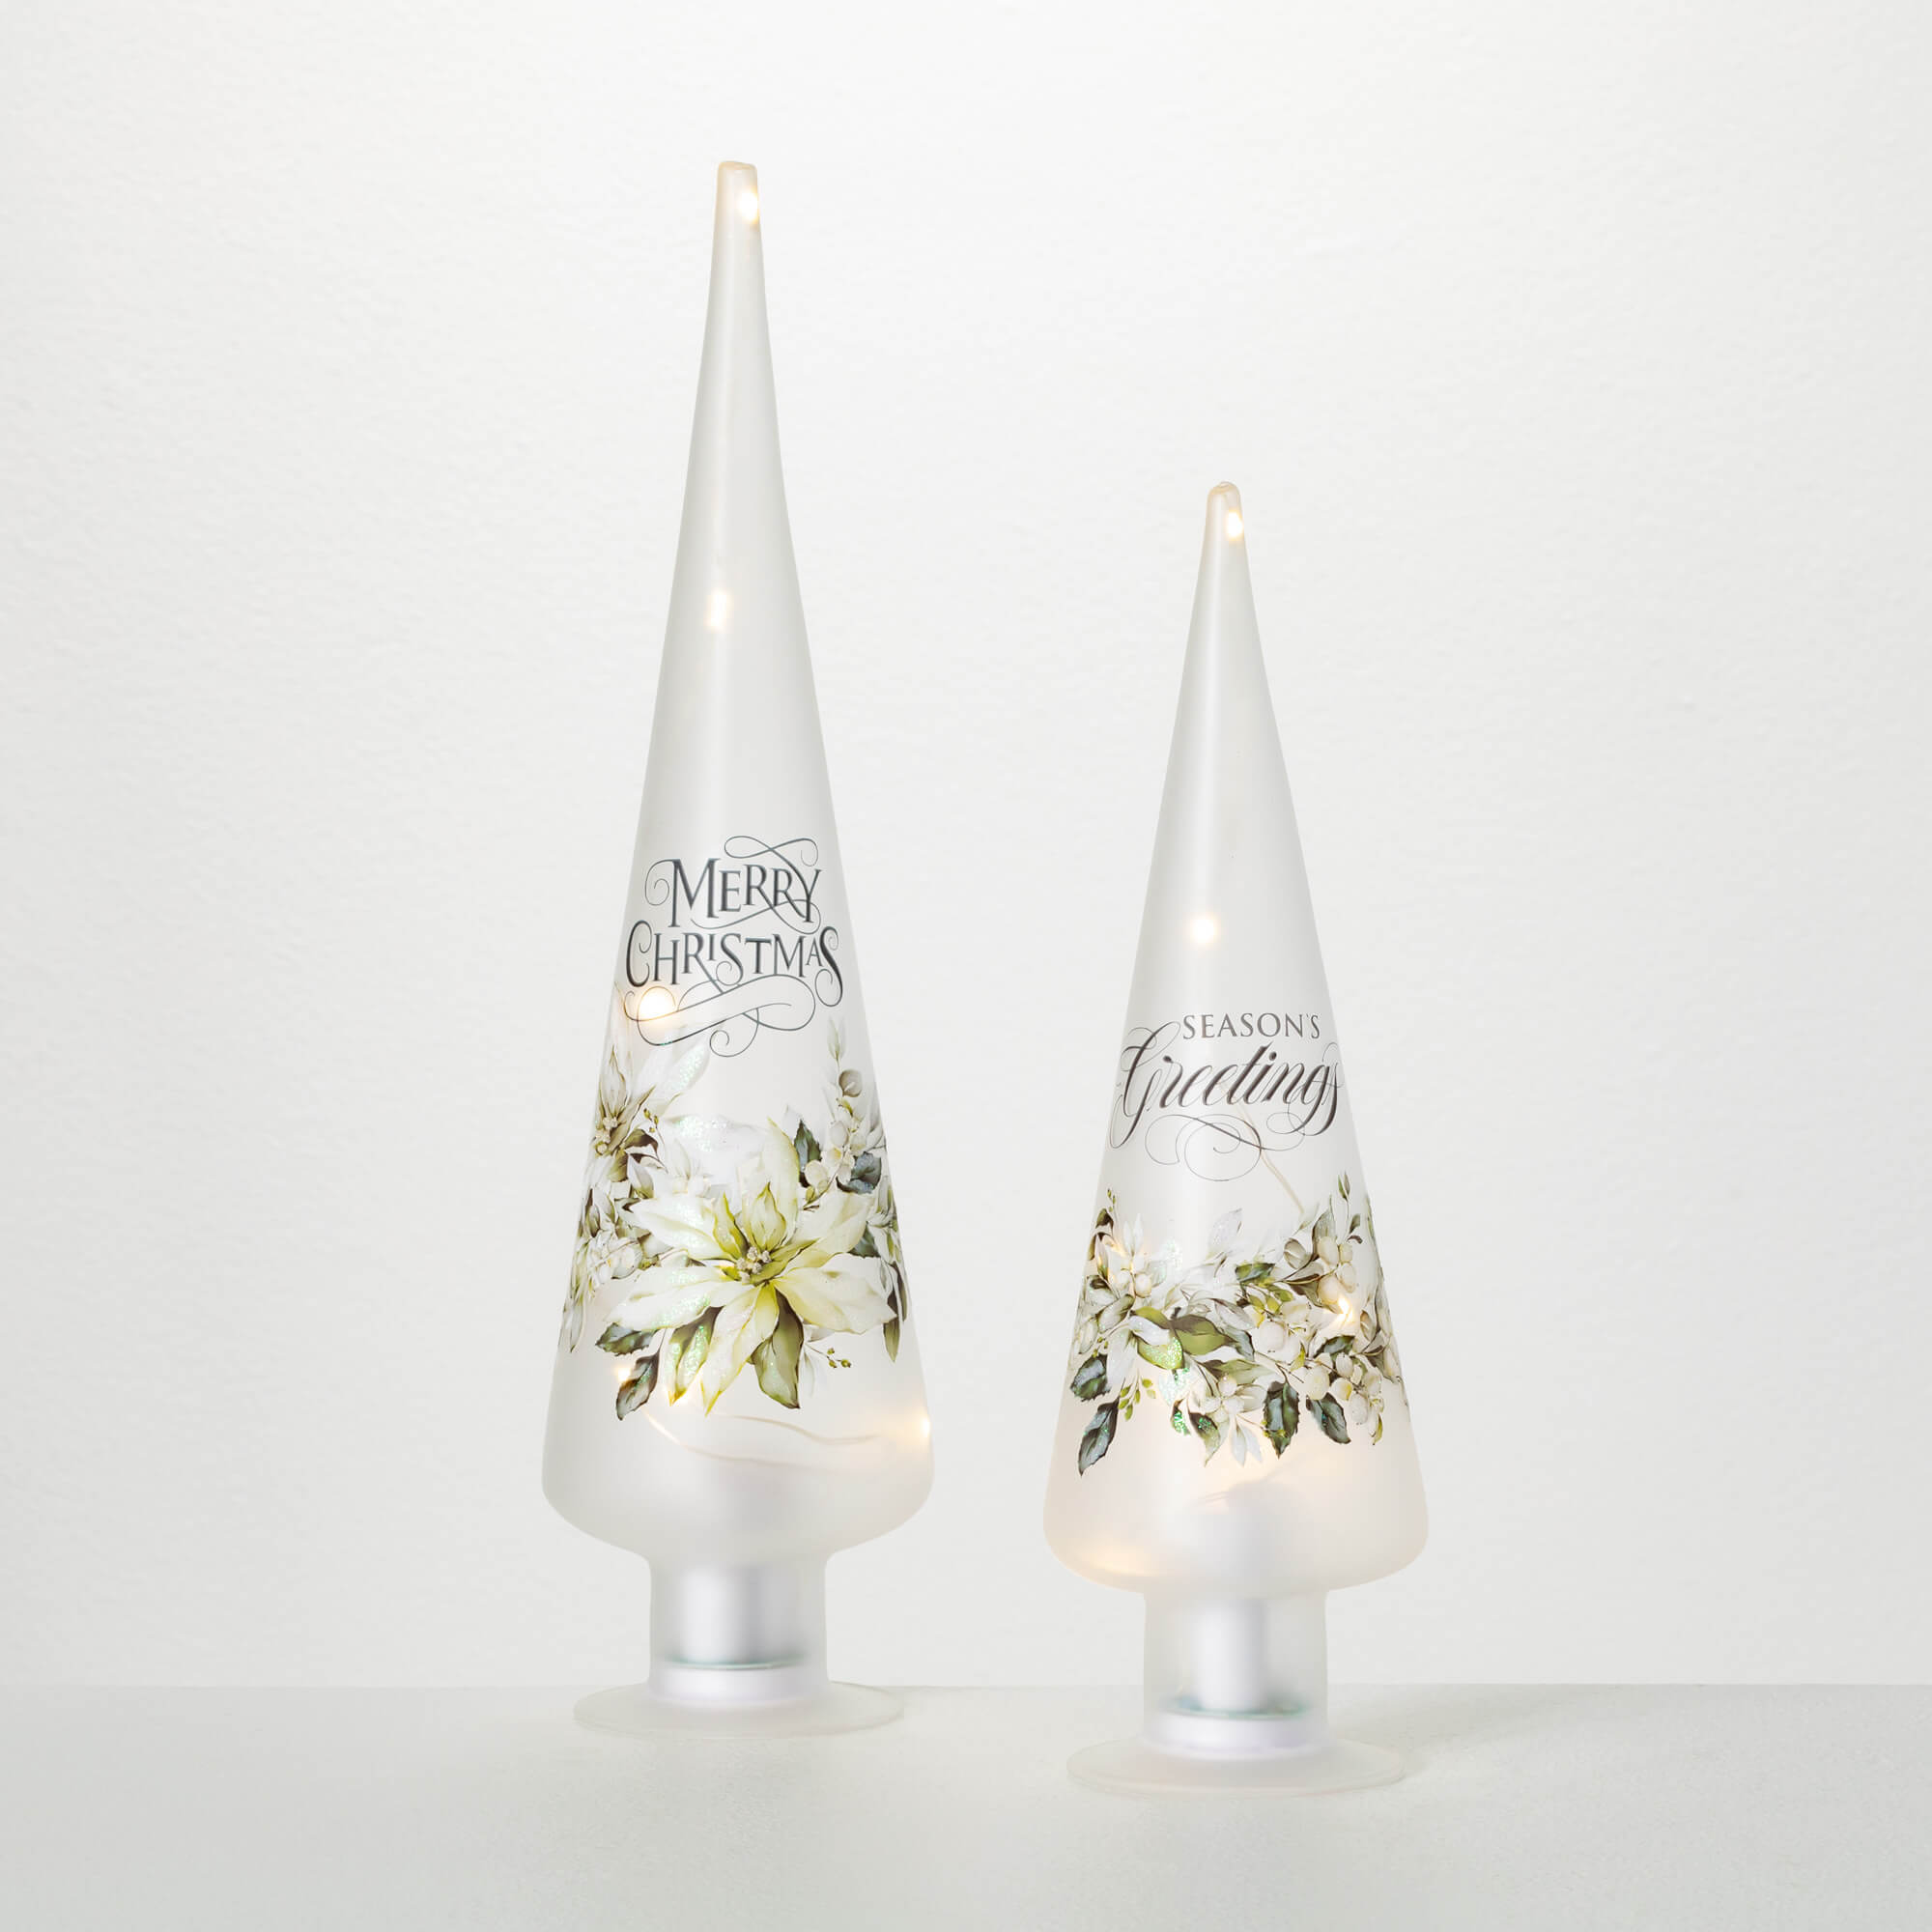 LIGHTED FLORAL TREE SET OF 2